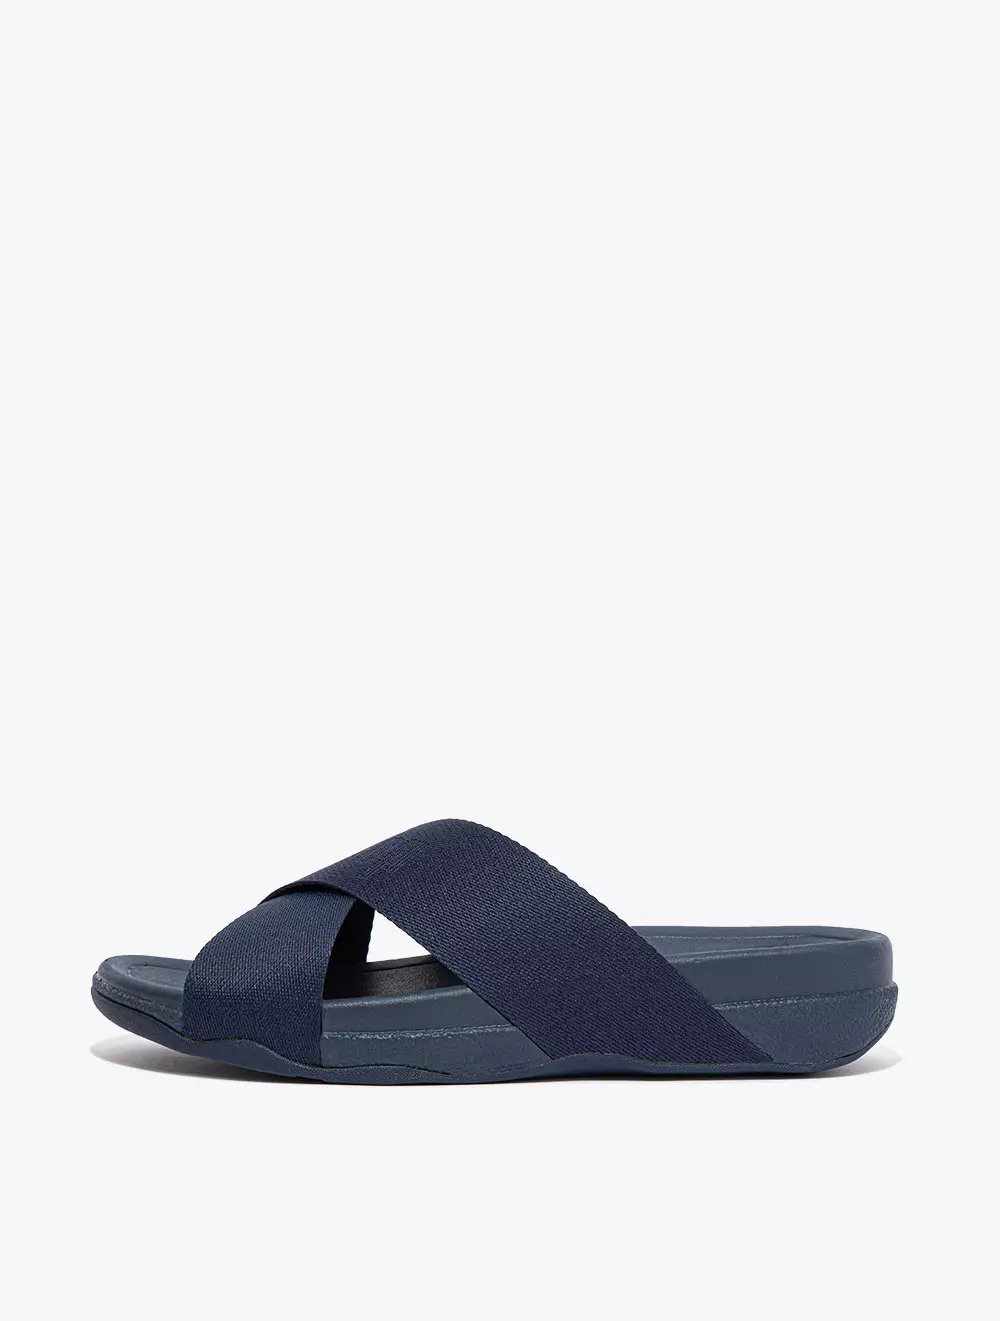 Jual FitFlop Fitflop SURFER WOVEN-LOGO WB-CS EZ8-399 - Mdn Navy ...